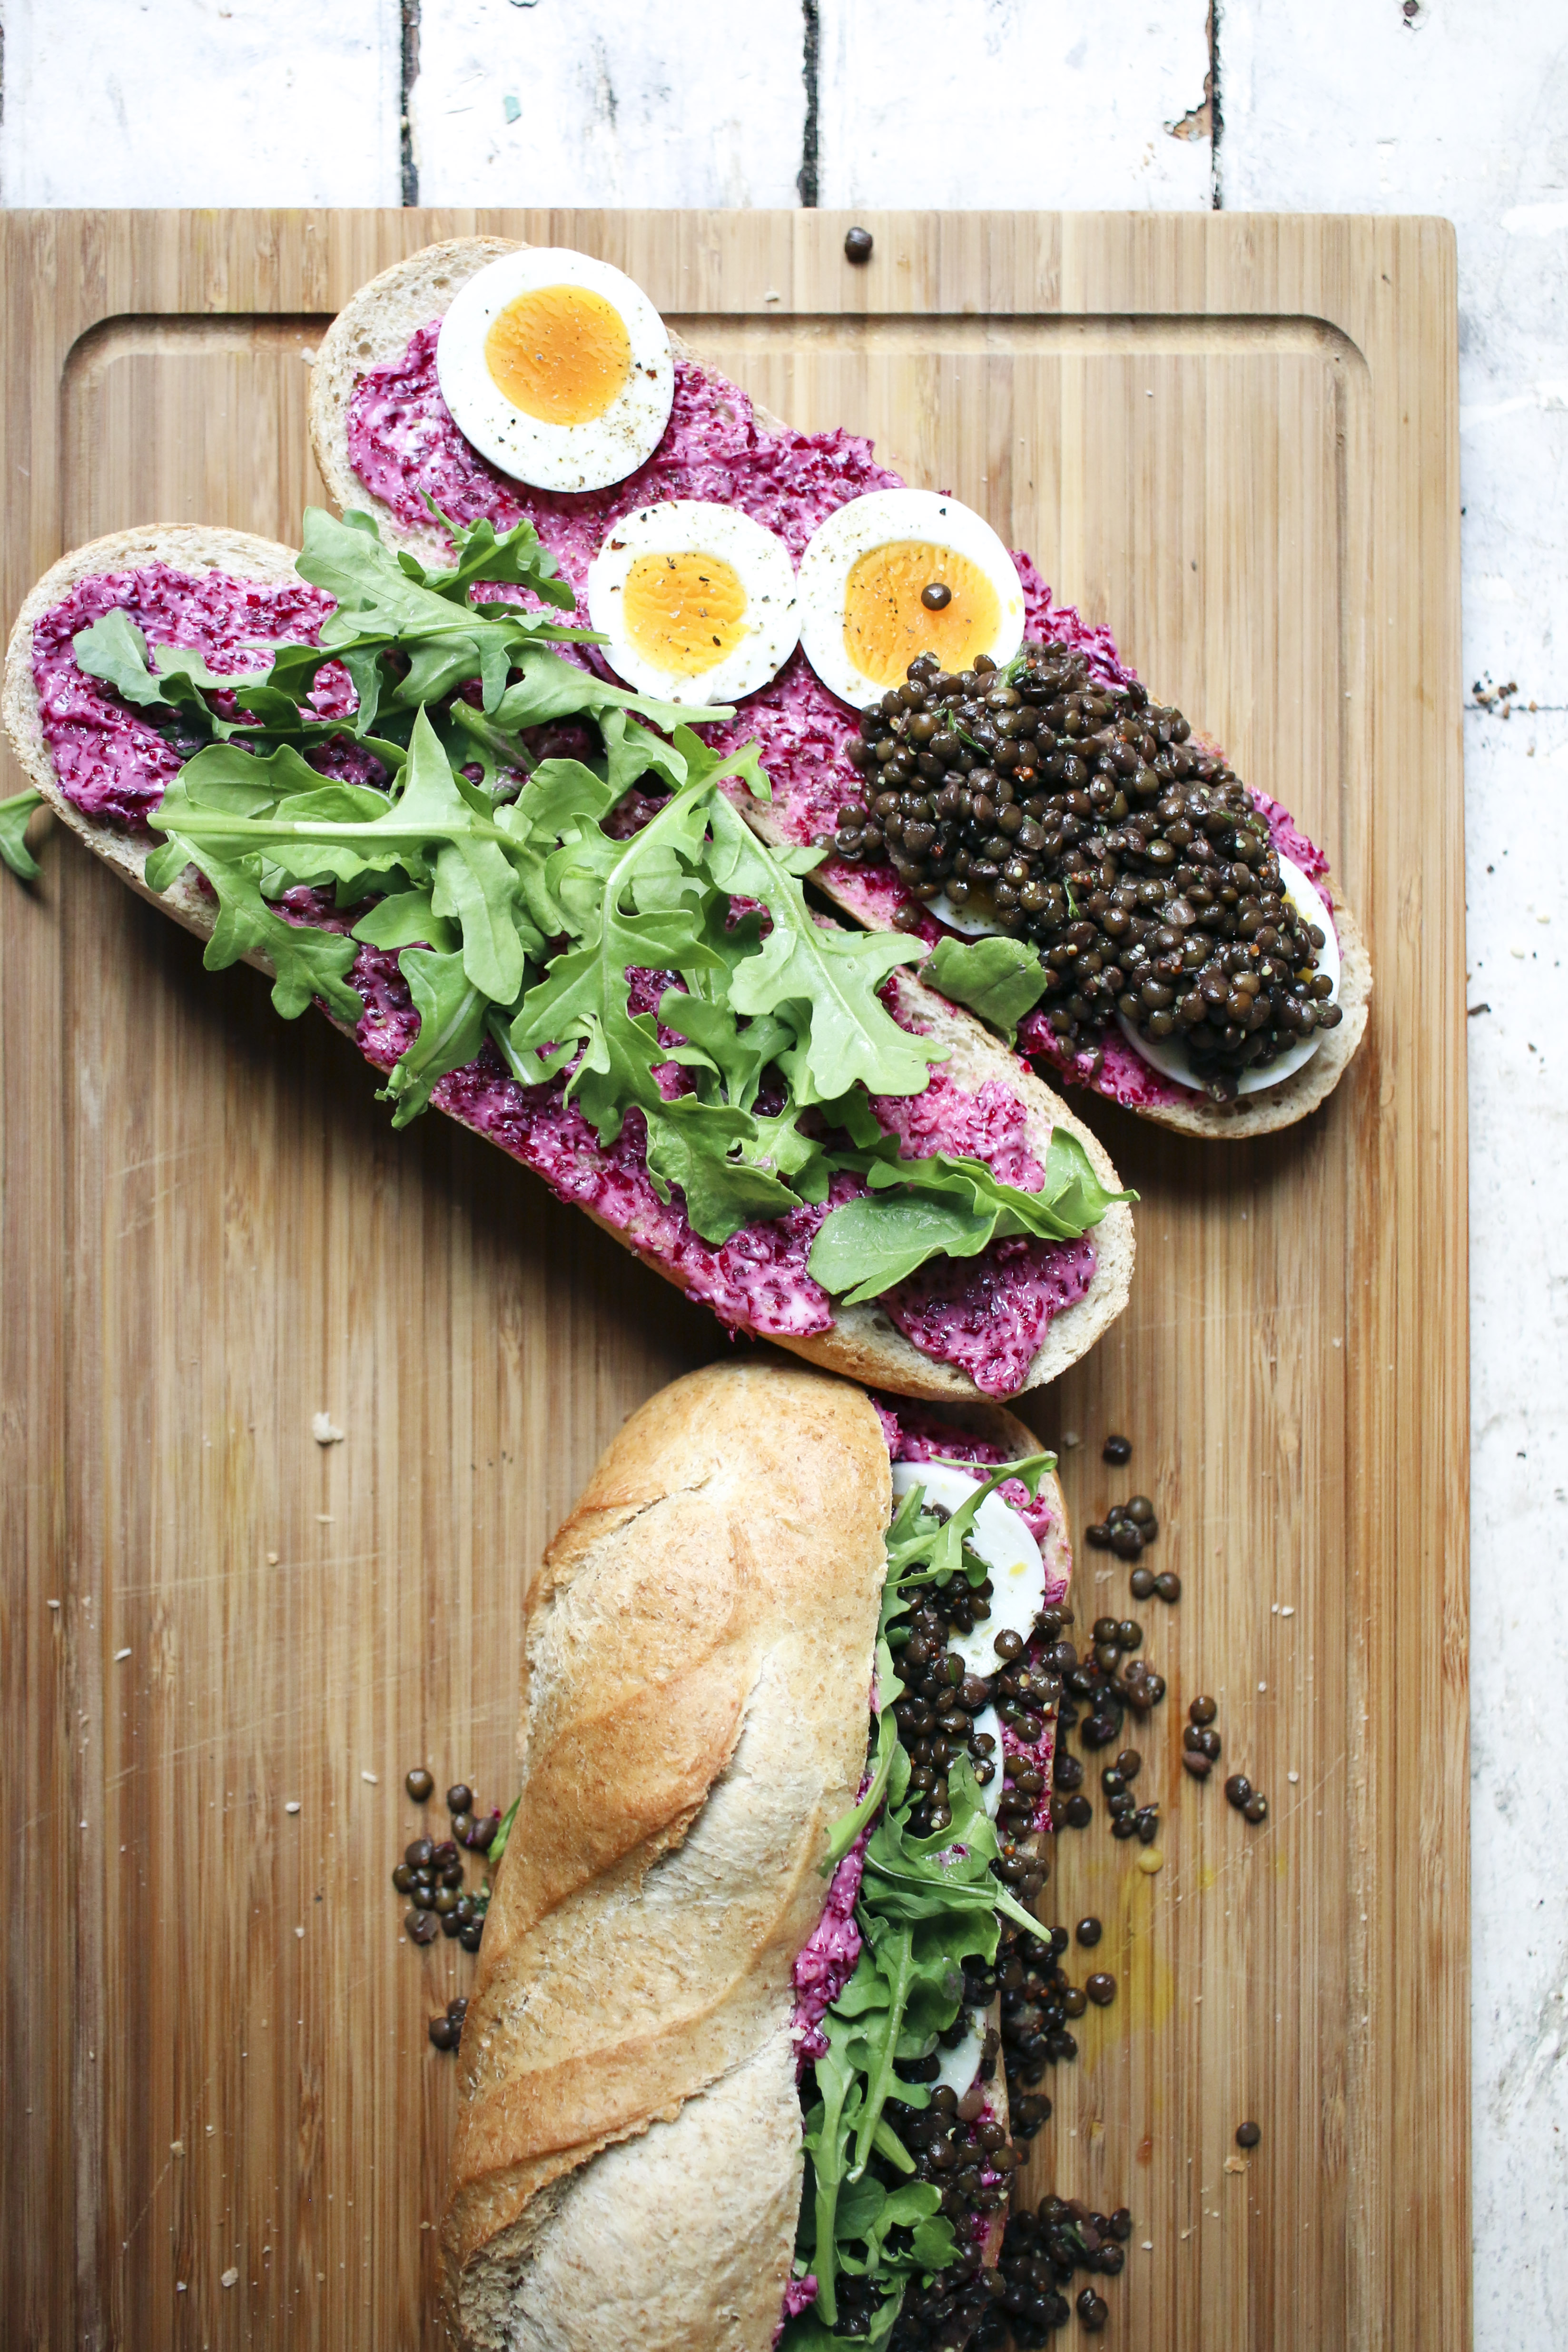 Lentil Sandwich with Pickled Beet Butter | I Will Not Eat Oysters